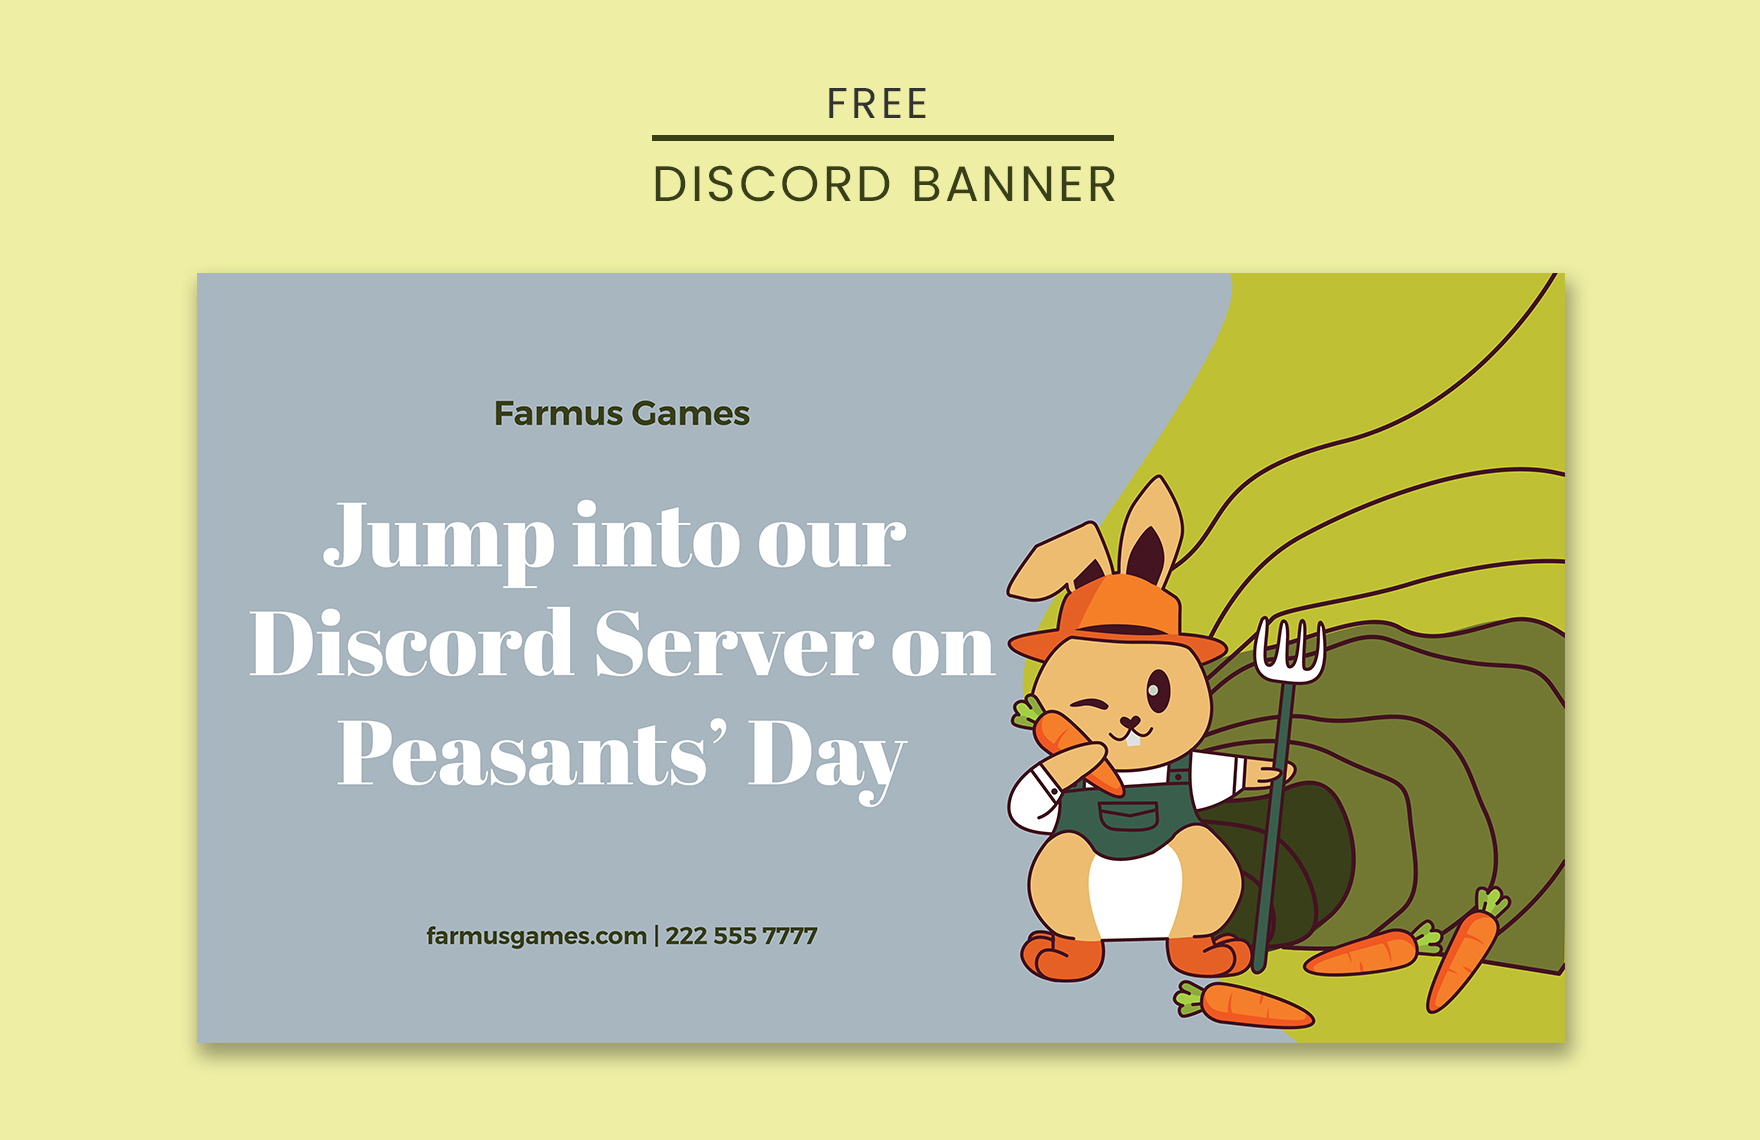 Peasants' Day Discord Banner